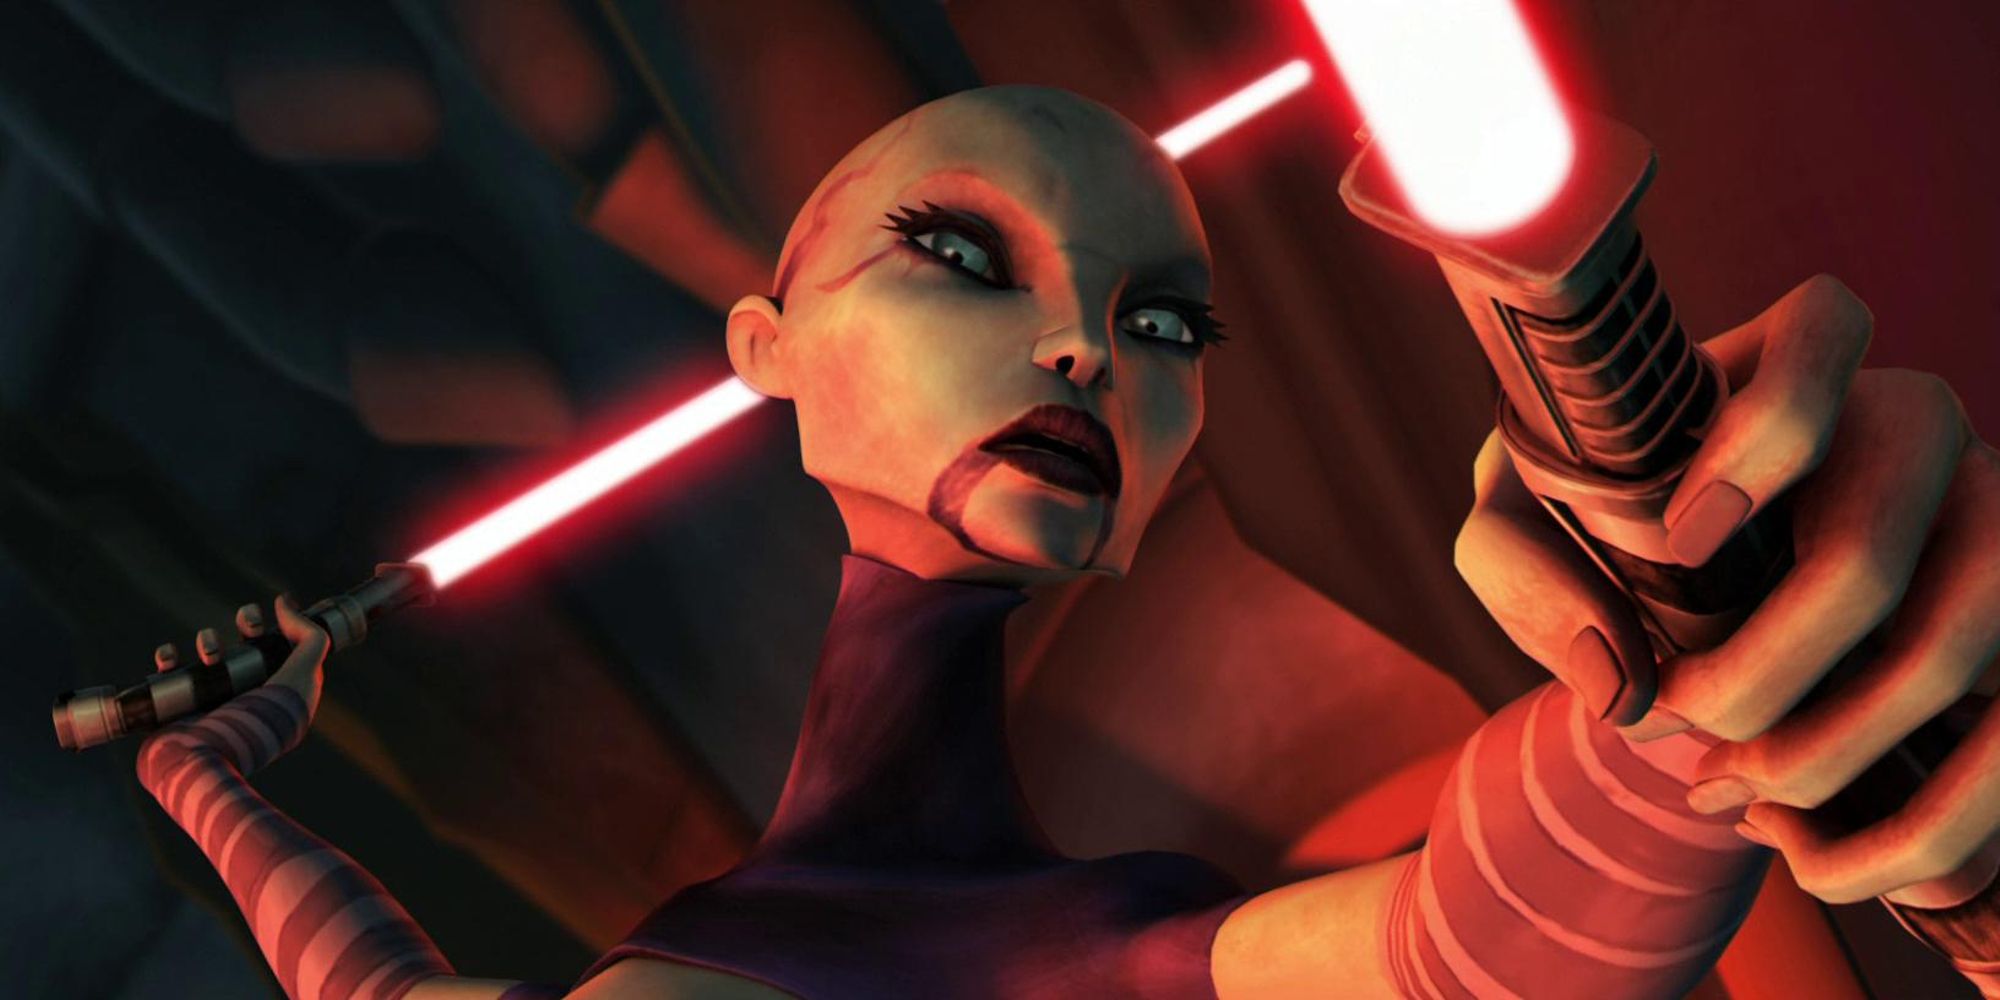 Asajj Ventress with her twin lightsabers in Star Wars The Clone Wars